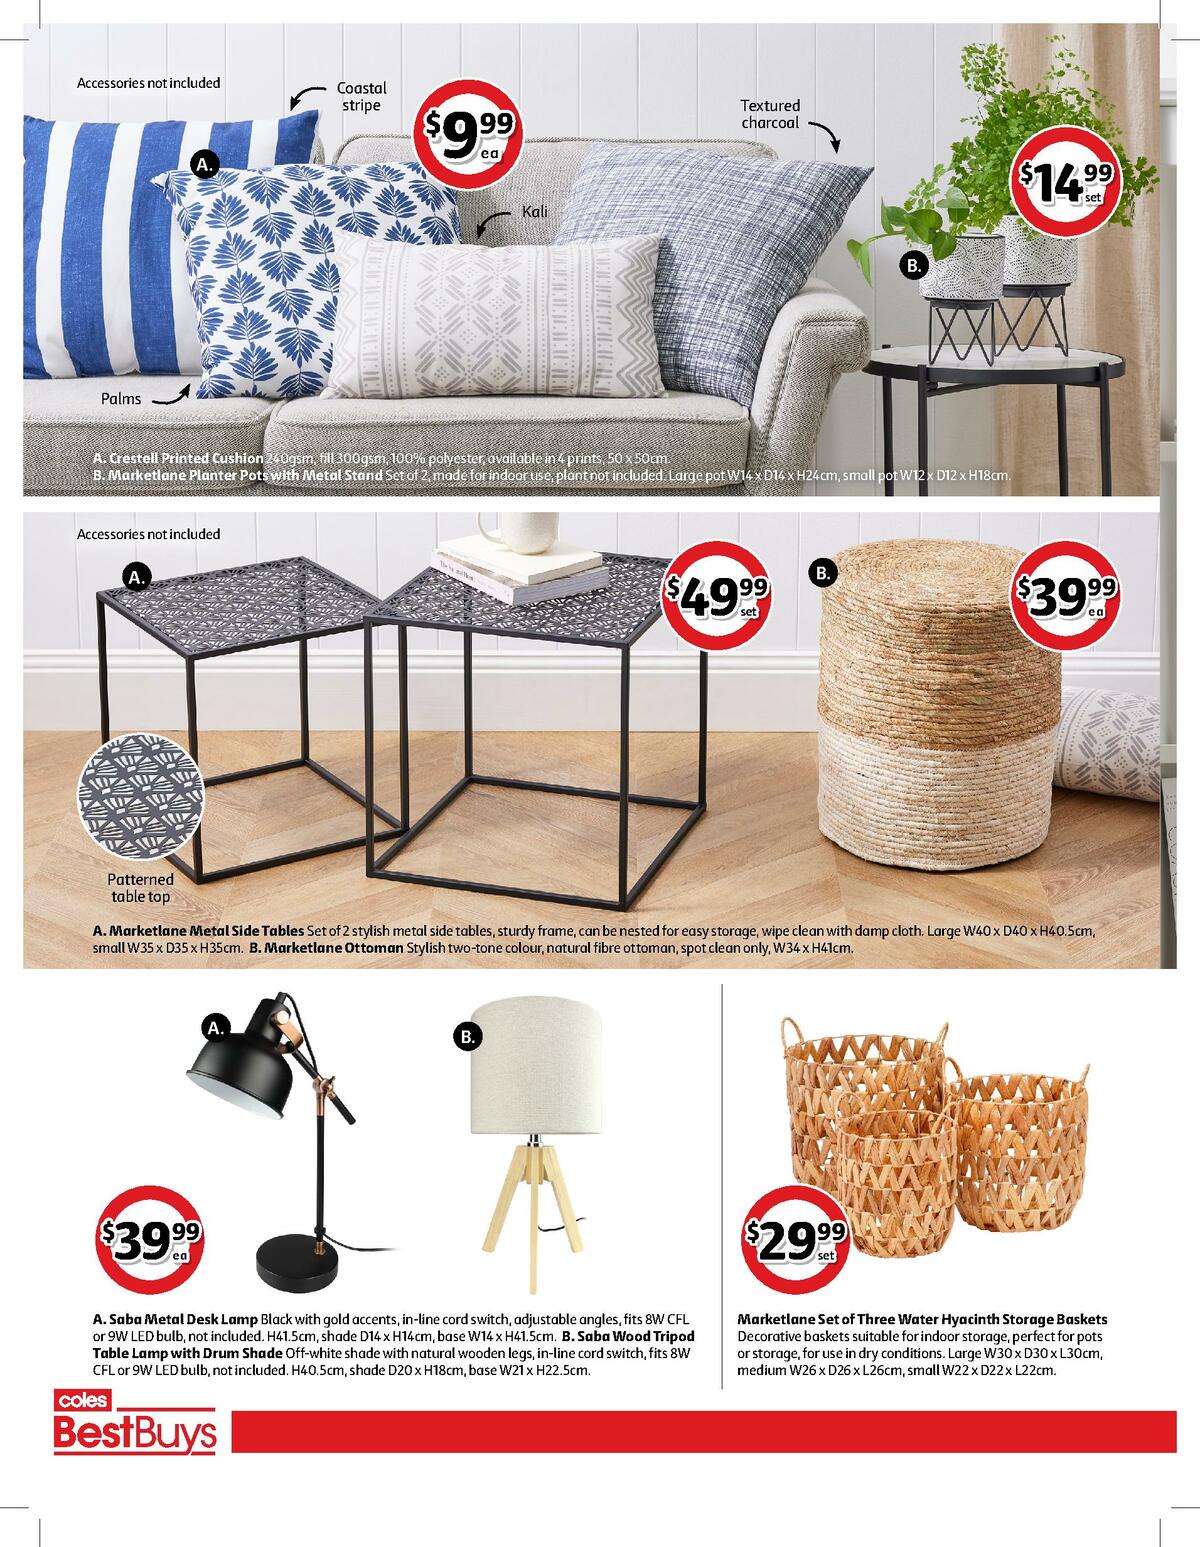 Coles Best Buys Catalogues from 9 April